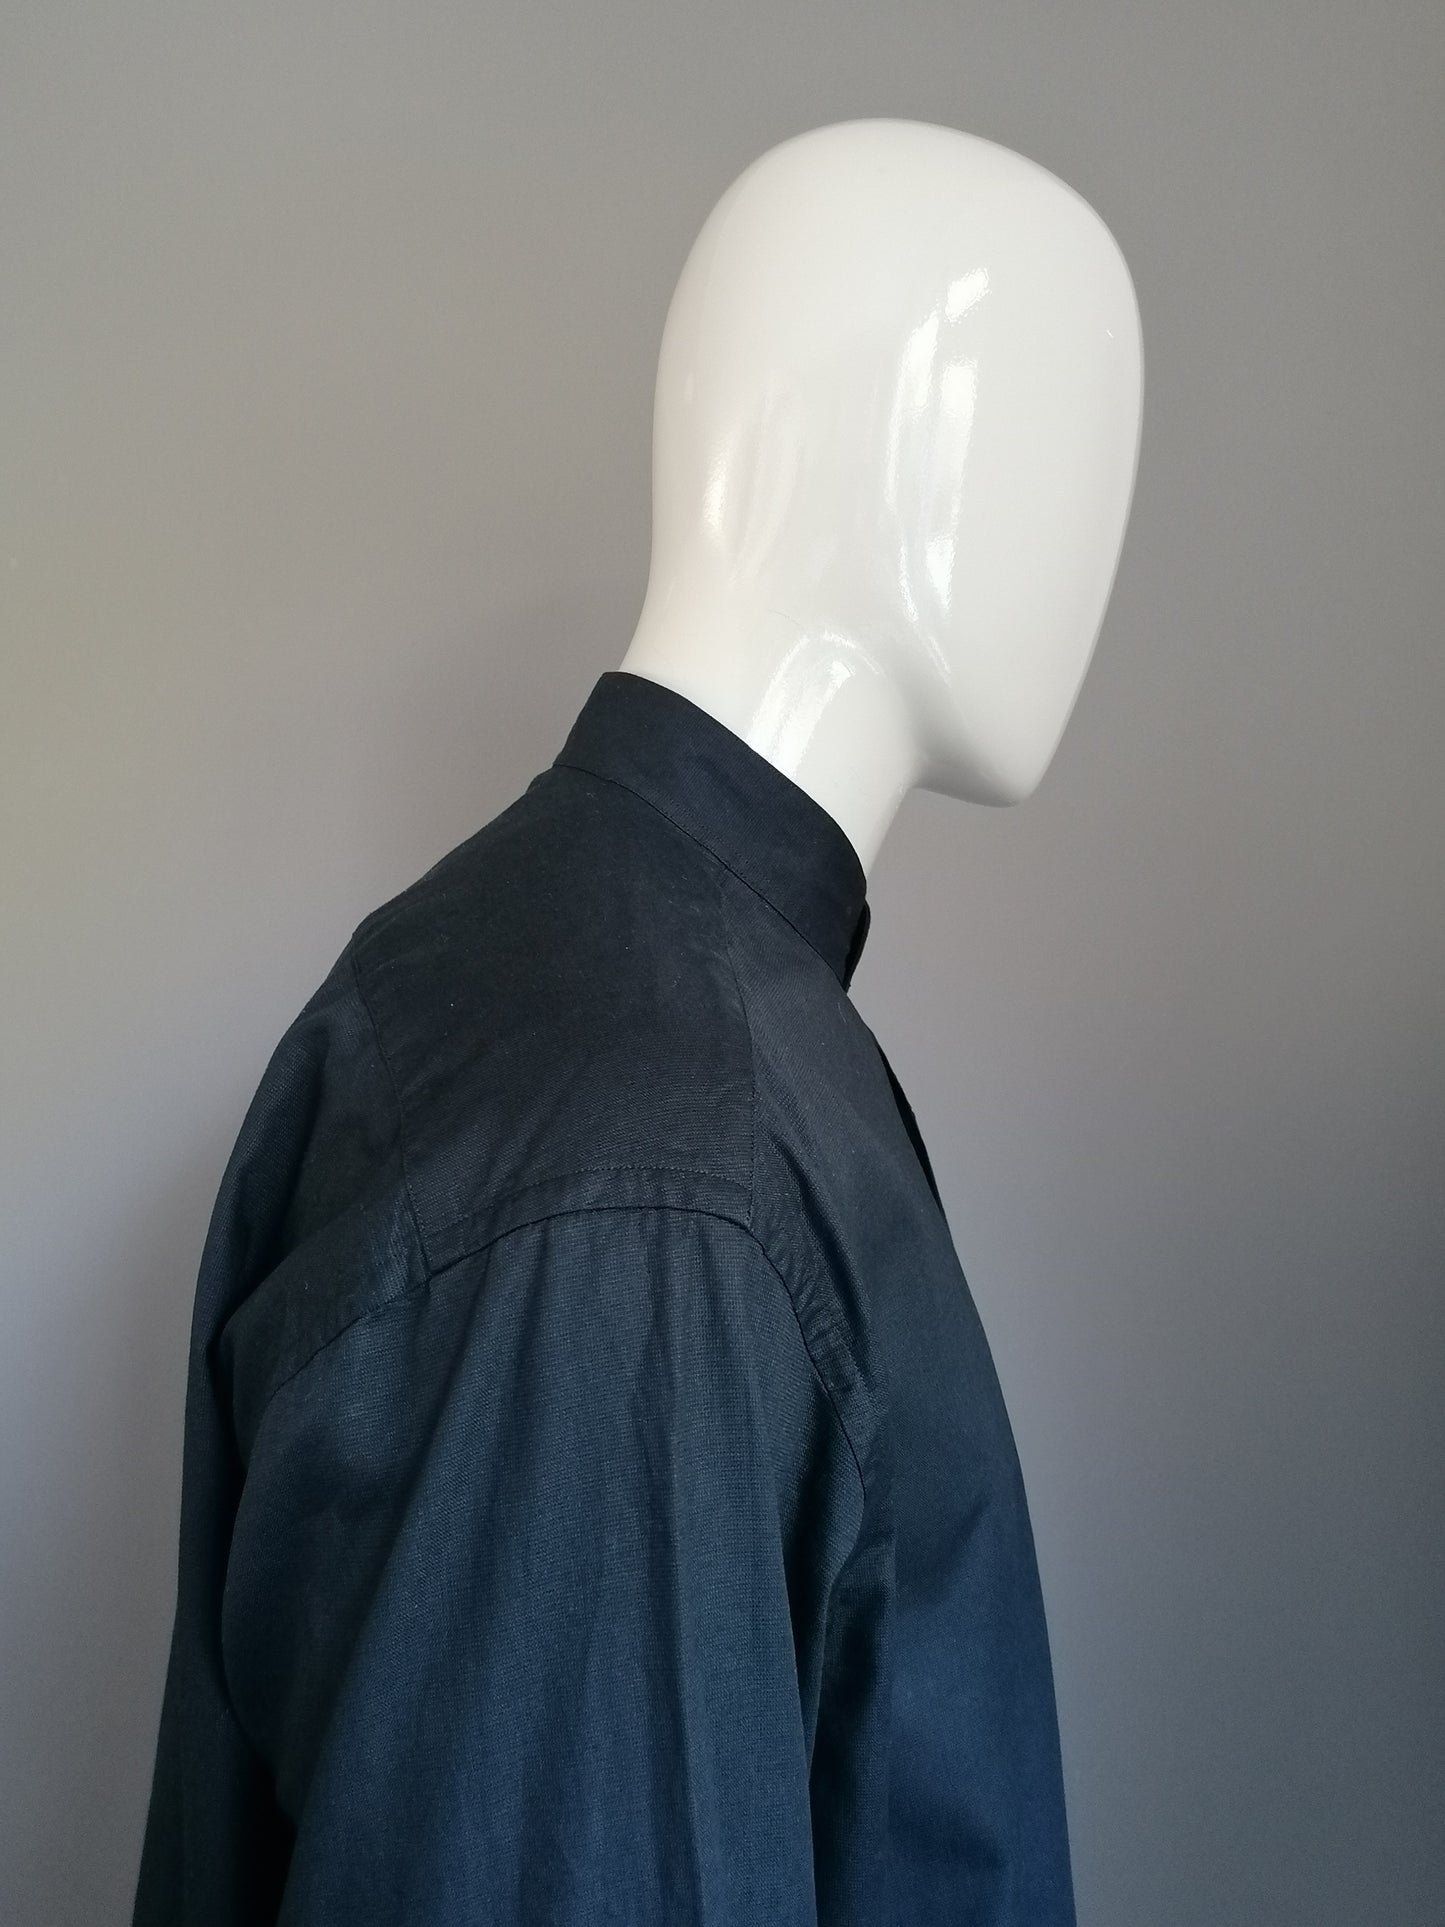 Mcearl shirt with upright / farmers / mao collar .. black colored. Size XL - XXL / 2XL.